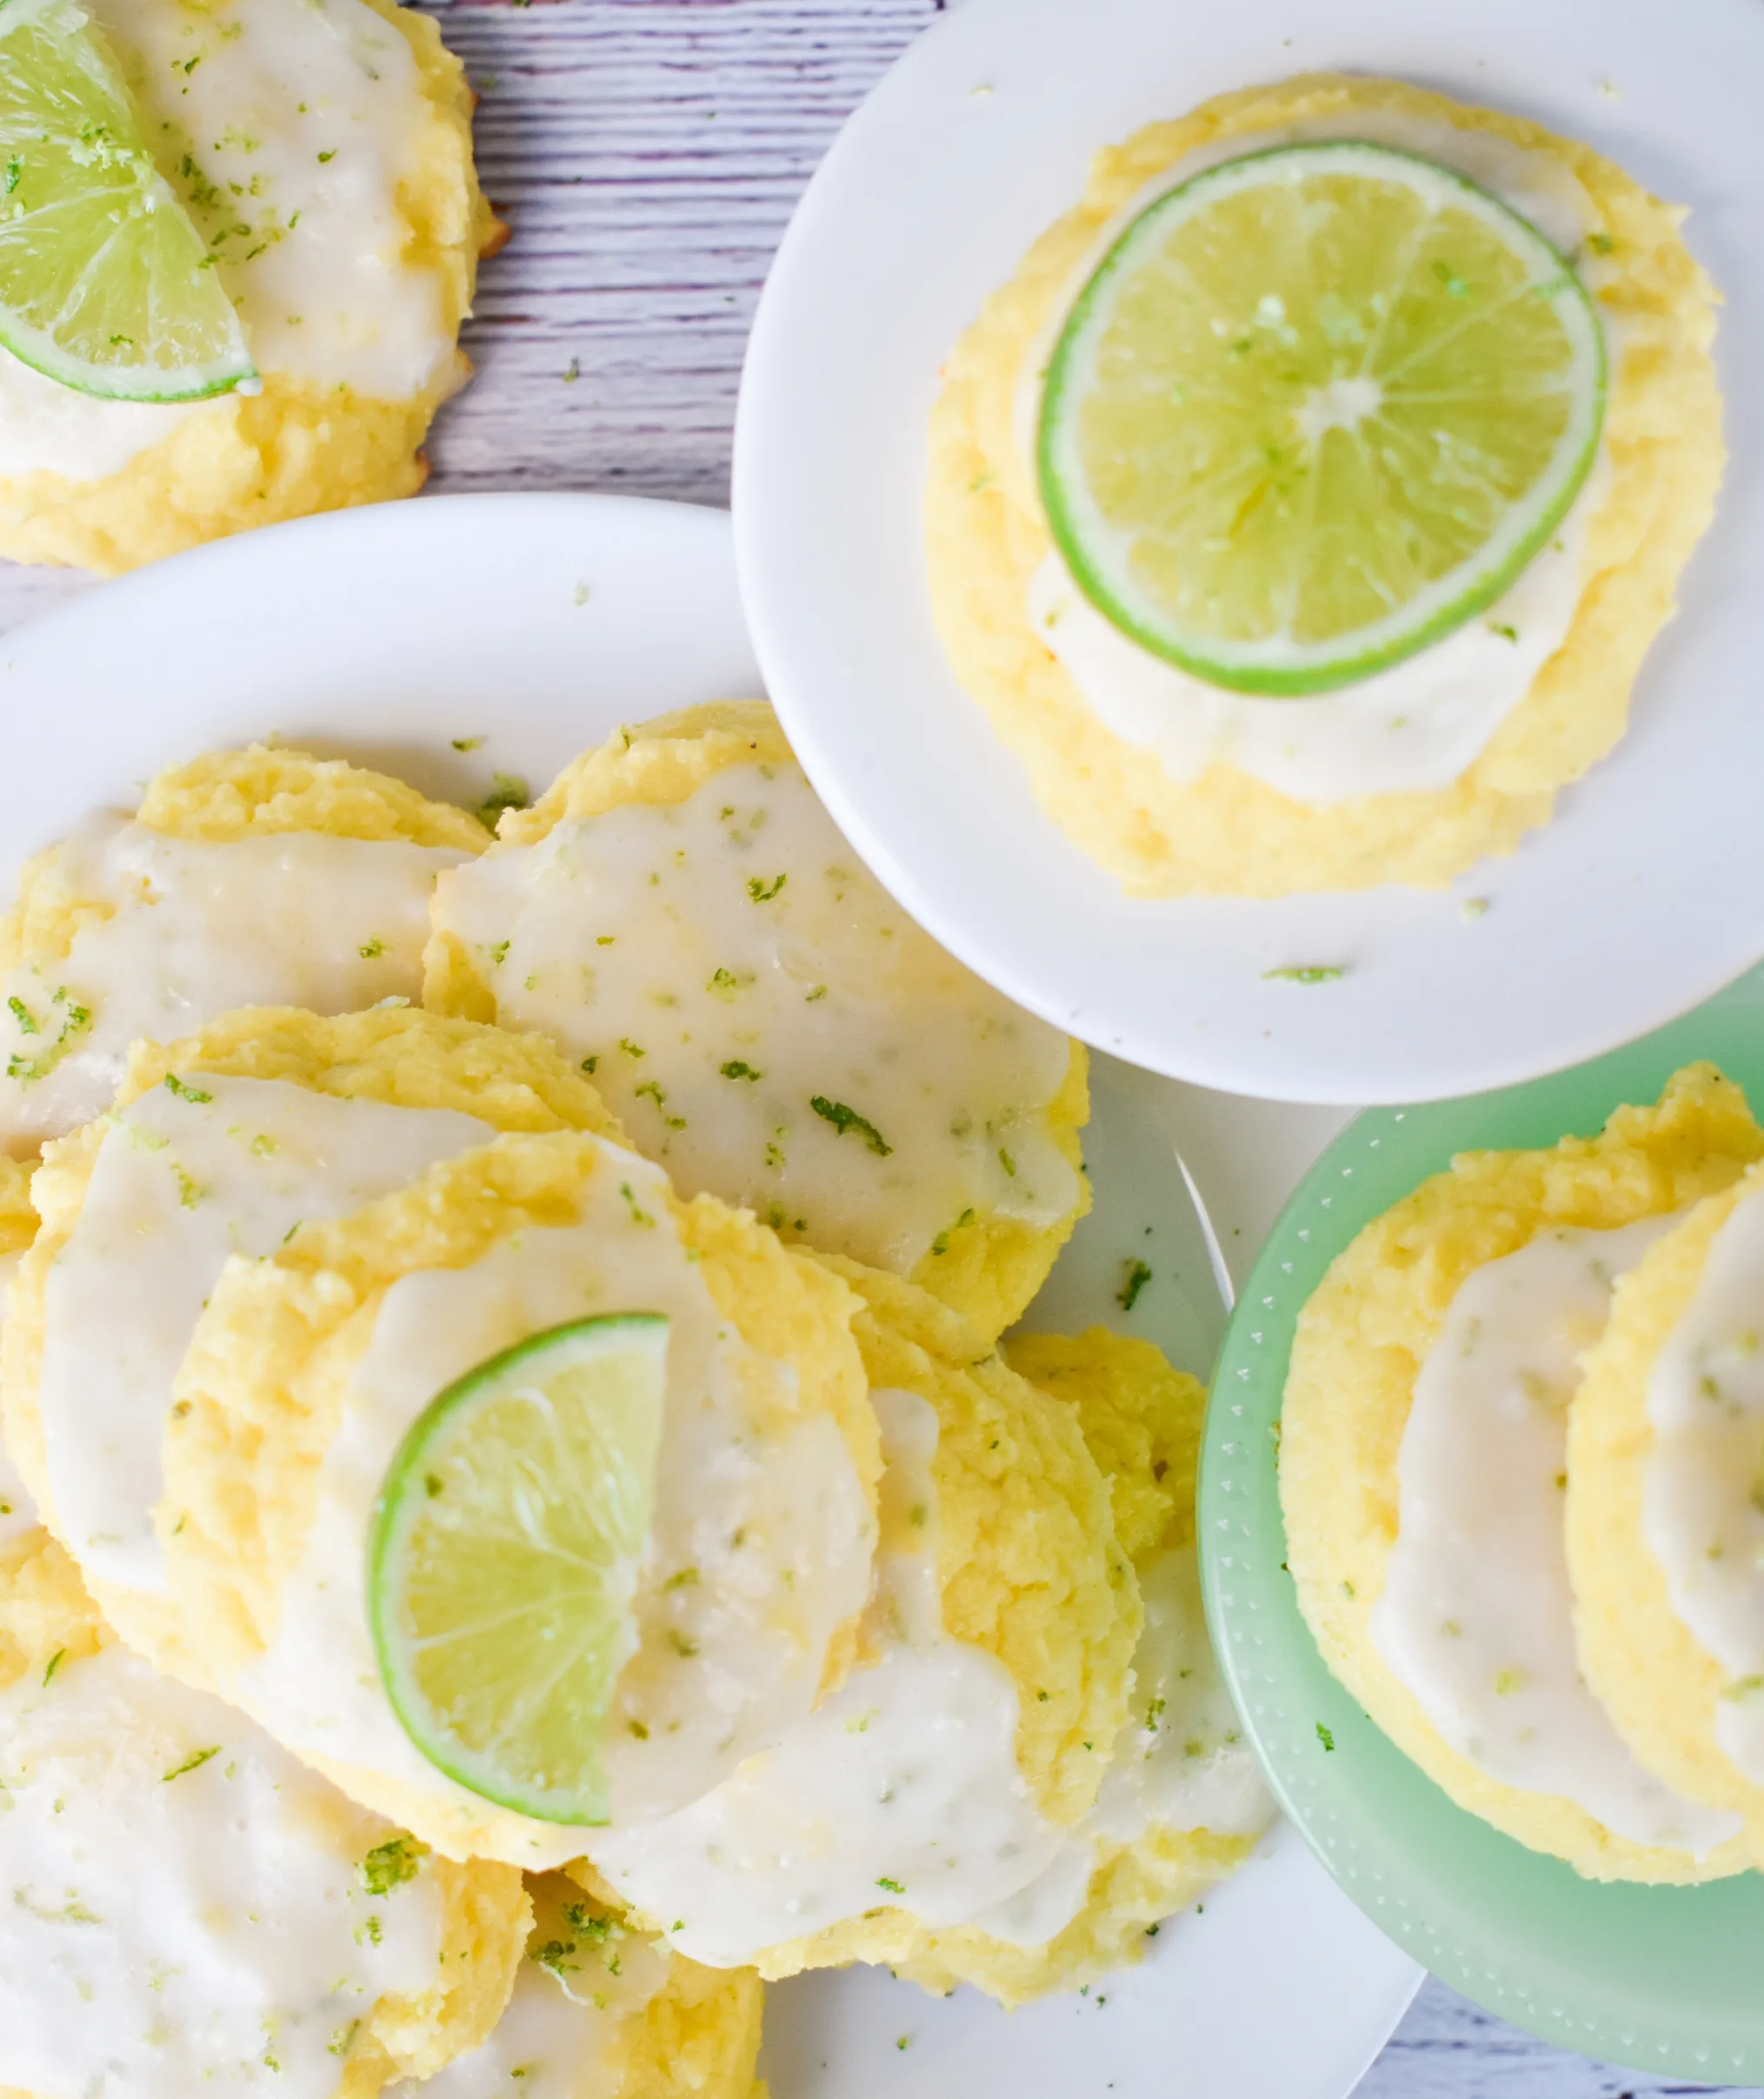 keto lime cookies served on different white and green plates and ready to enjoy